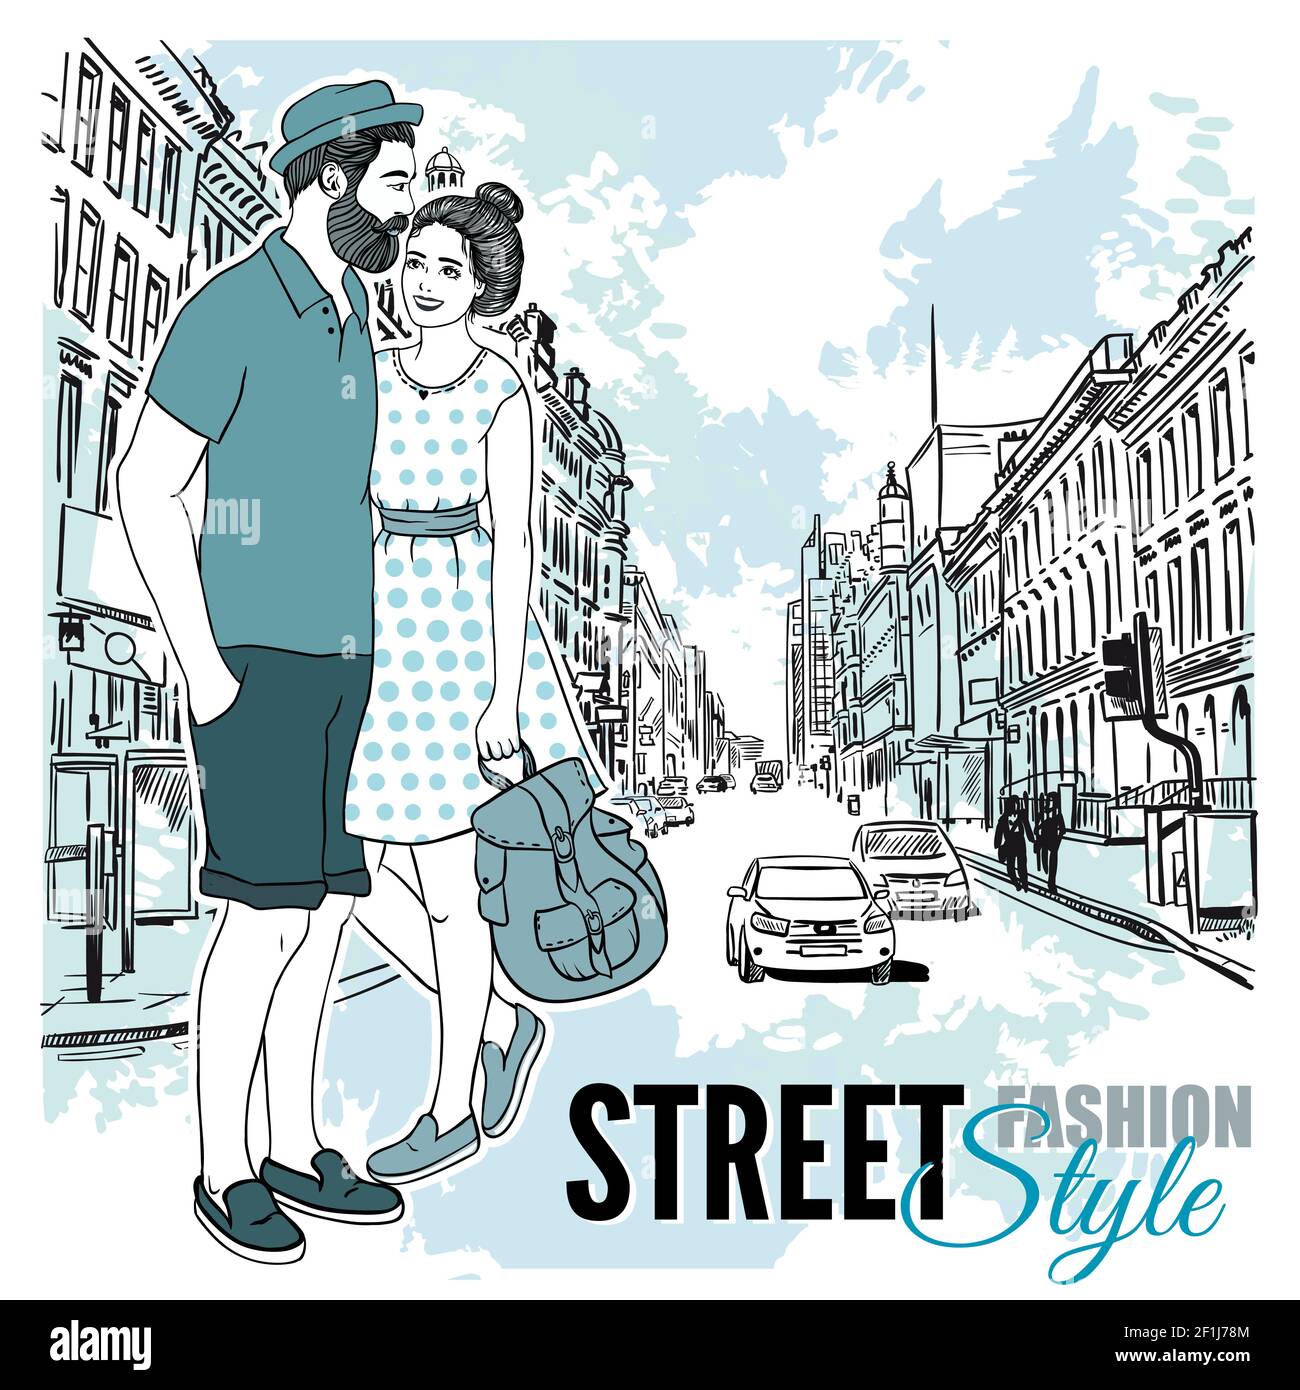 Blue color style couple fashion city street poster with street fashion style description vector illustration Stock Vector